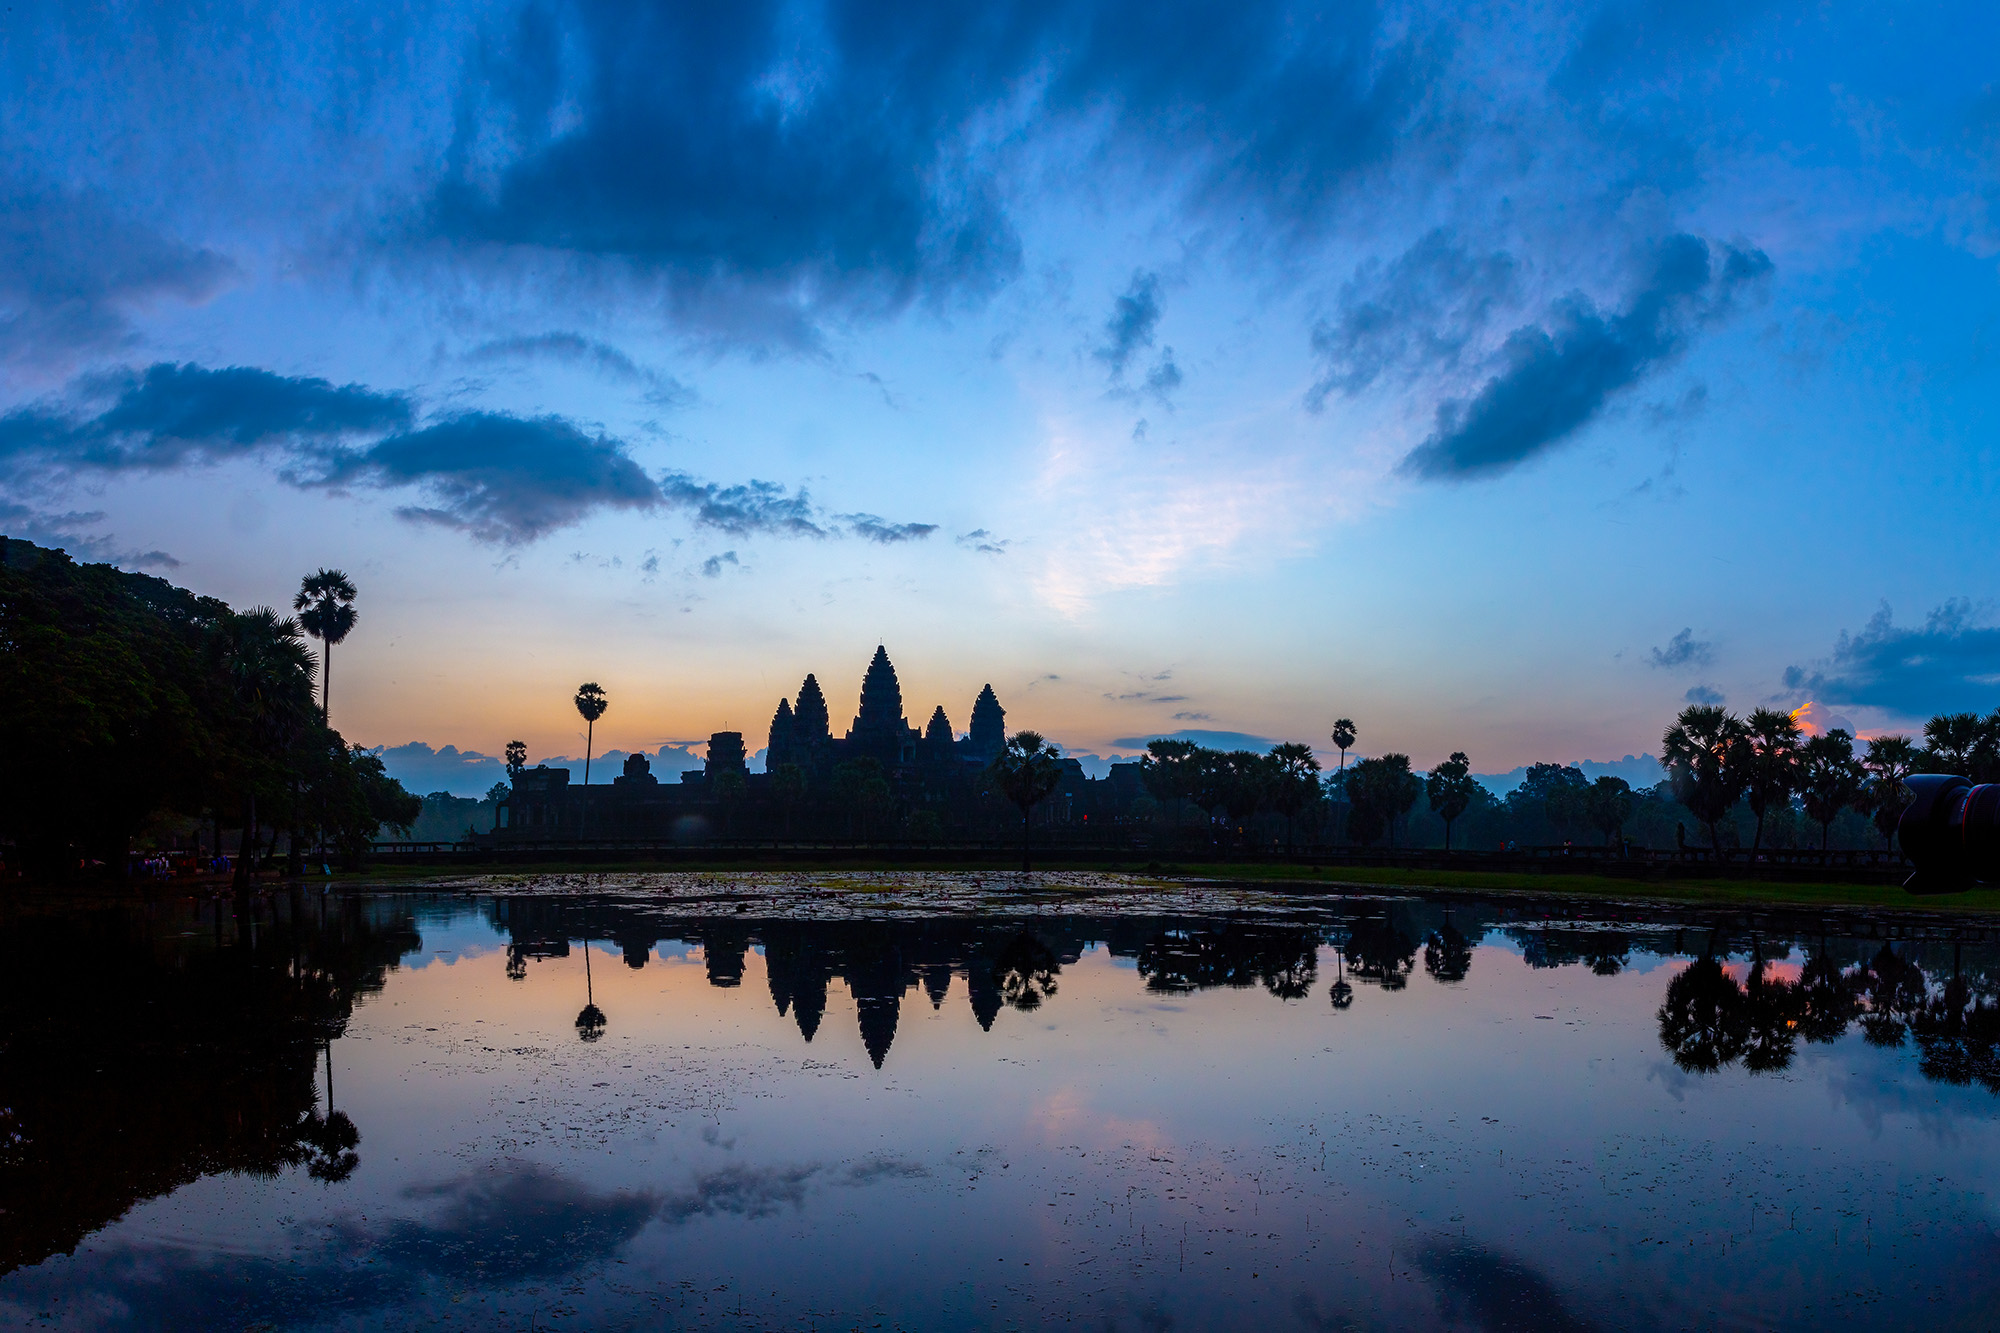 Arriving at Angkor Wat before sunrise, I embraced the serene darkness, ready to capture the reflections. As the sun gradually...